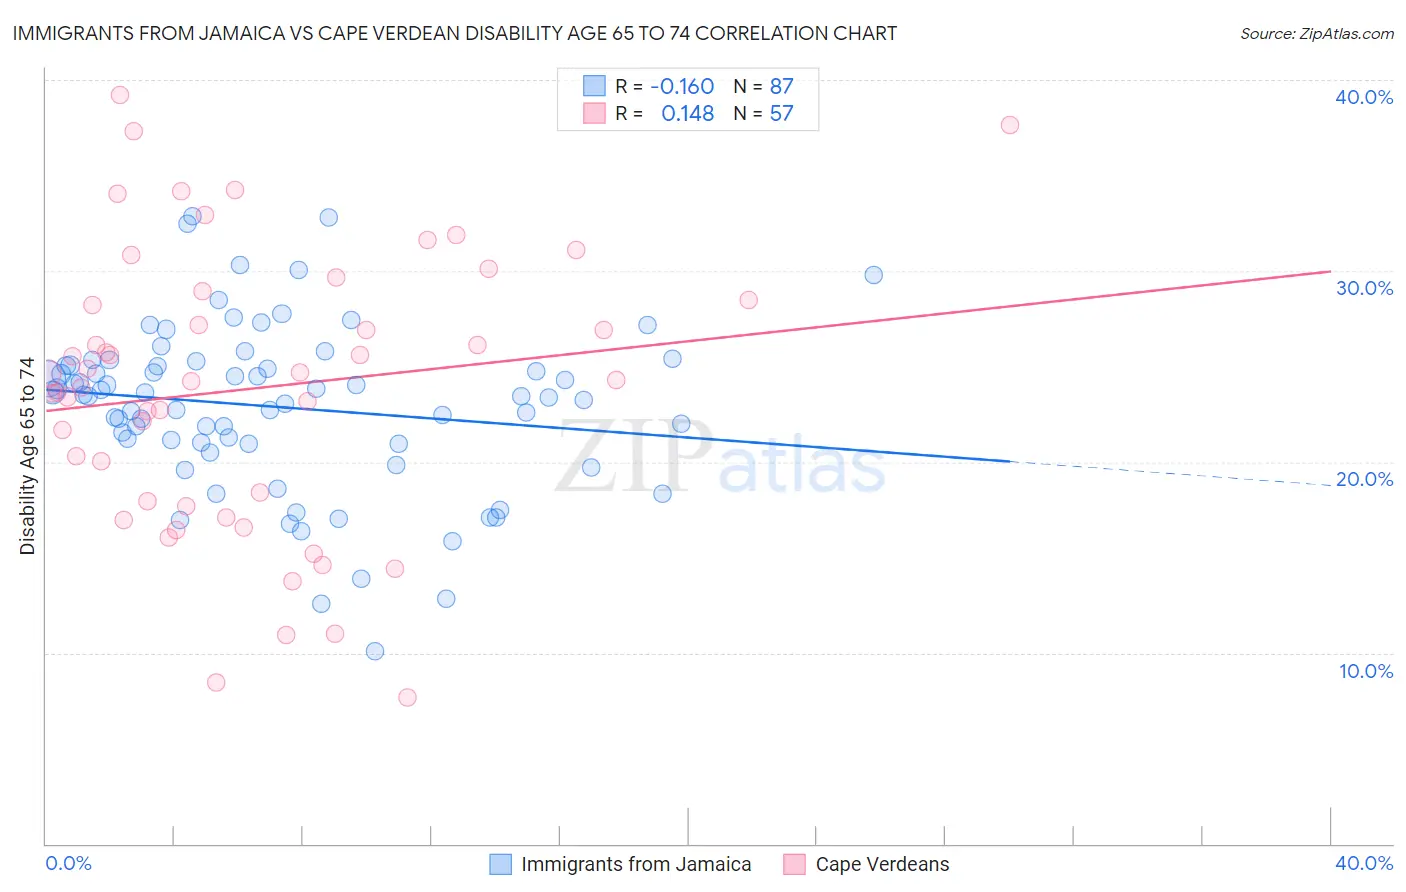 Immigrants from Jamaica vs Cape Verdean Disability Age 65 to 74